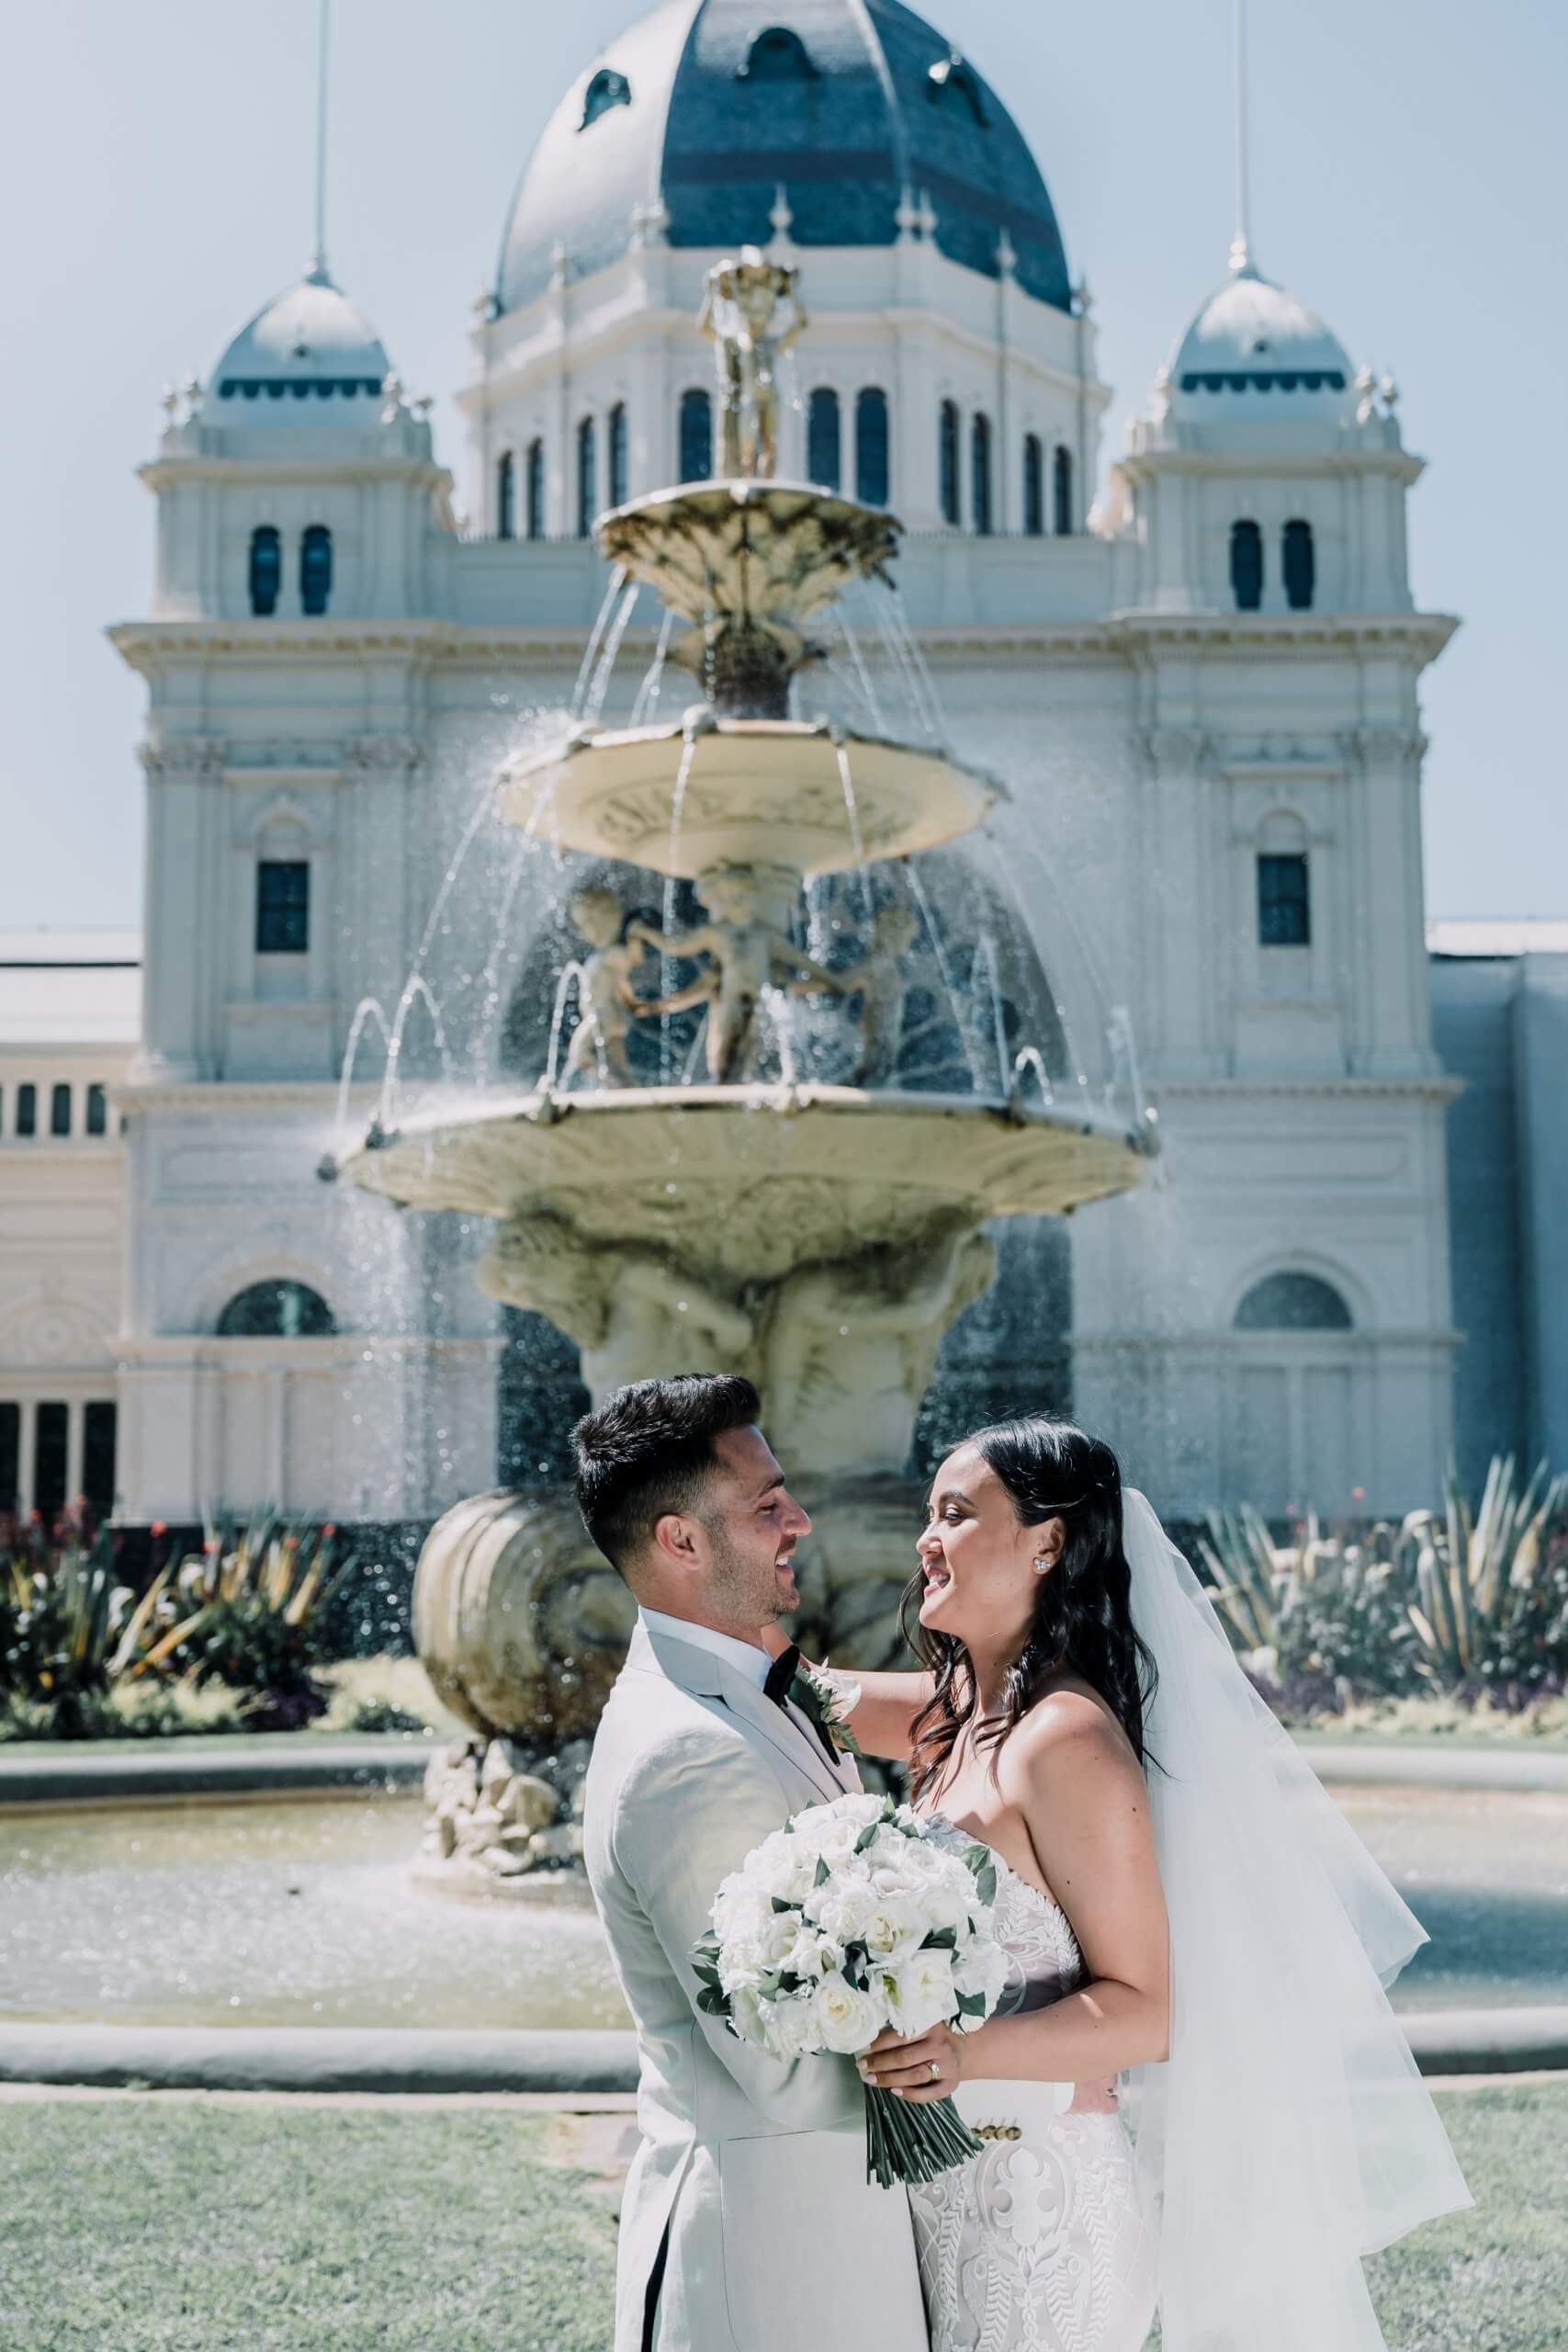 Lovely couple looking at each other with love by the Fountain, a perfect wedding shoot location. Captured by Black Avenue Productions